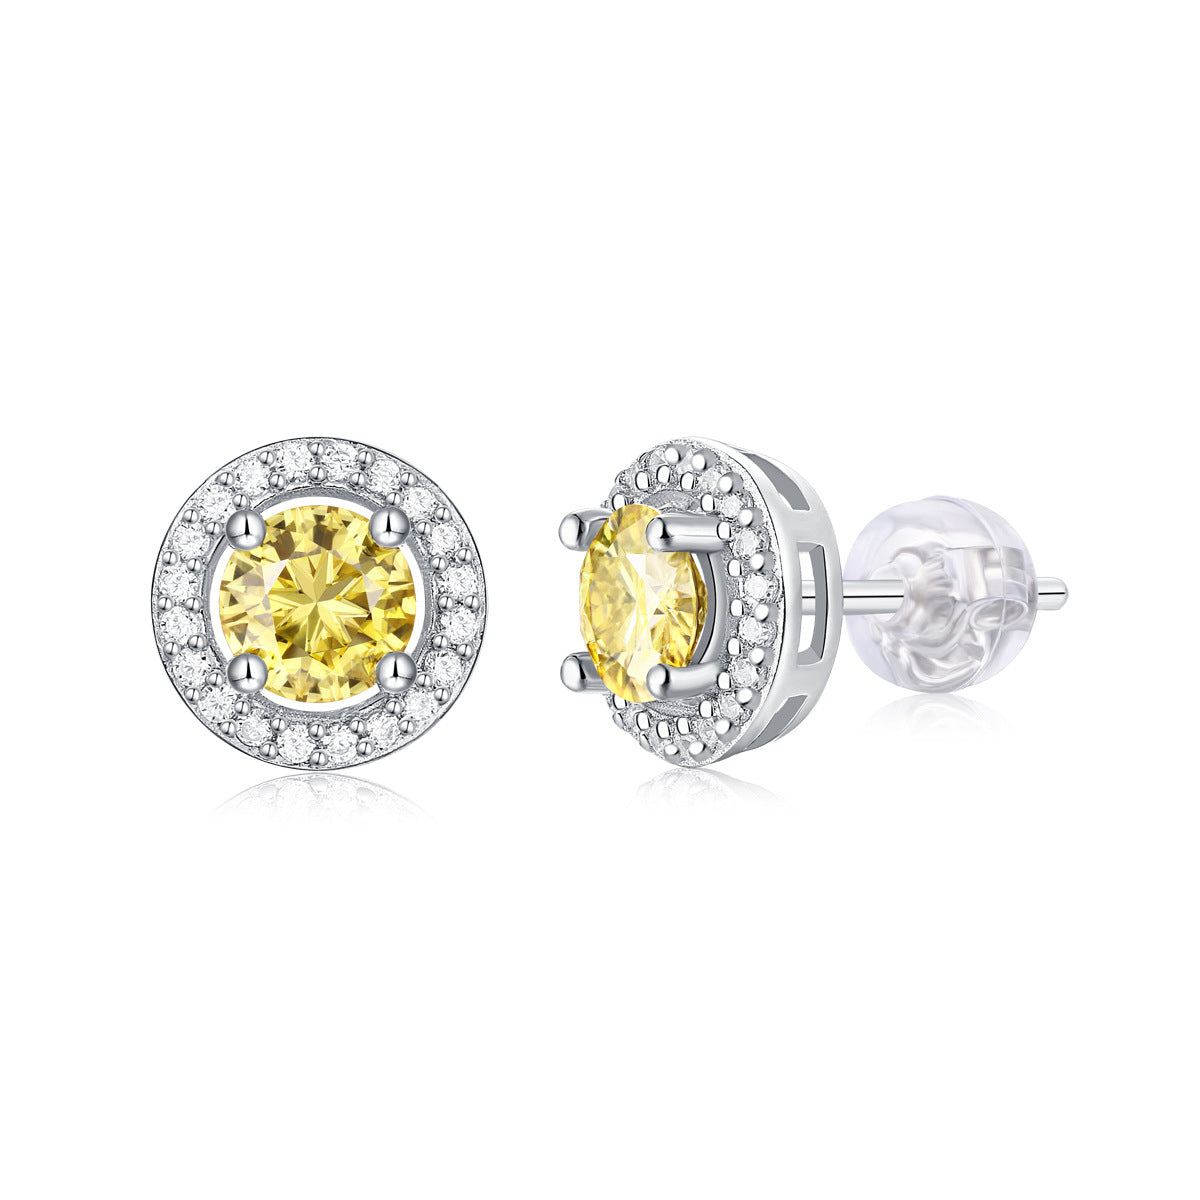 Simple Round Yellow Moissanite CZ 925 Sterling Silver Stud Earrings